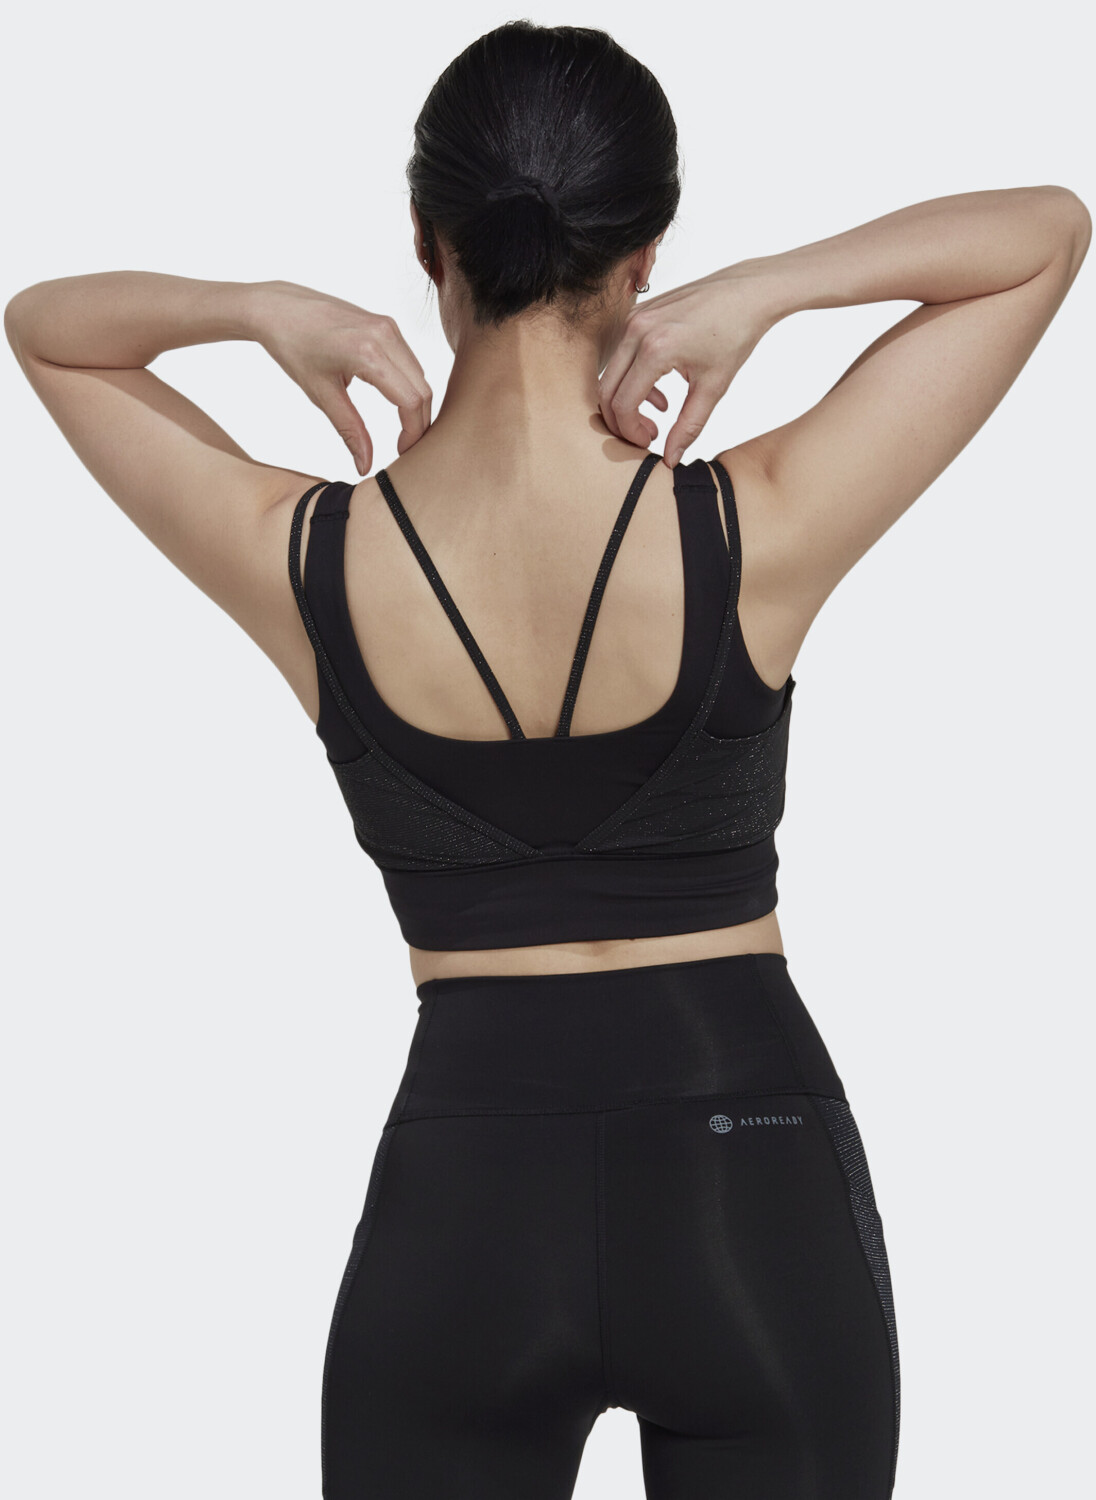 Buy Adidas Powerimpact Training Medium-Support Shiny sports bra (HM7885)  black from £22.00 (Today) – Best Deals on